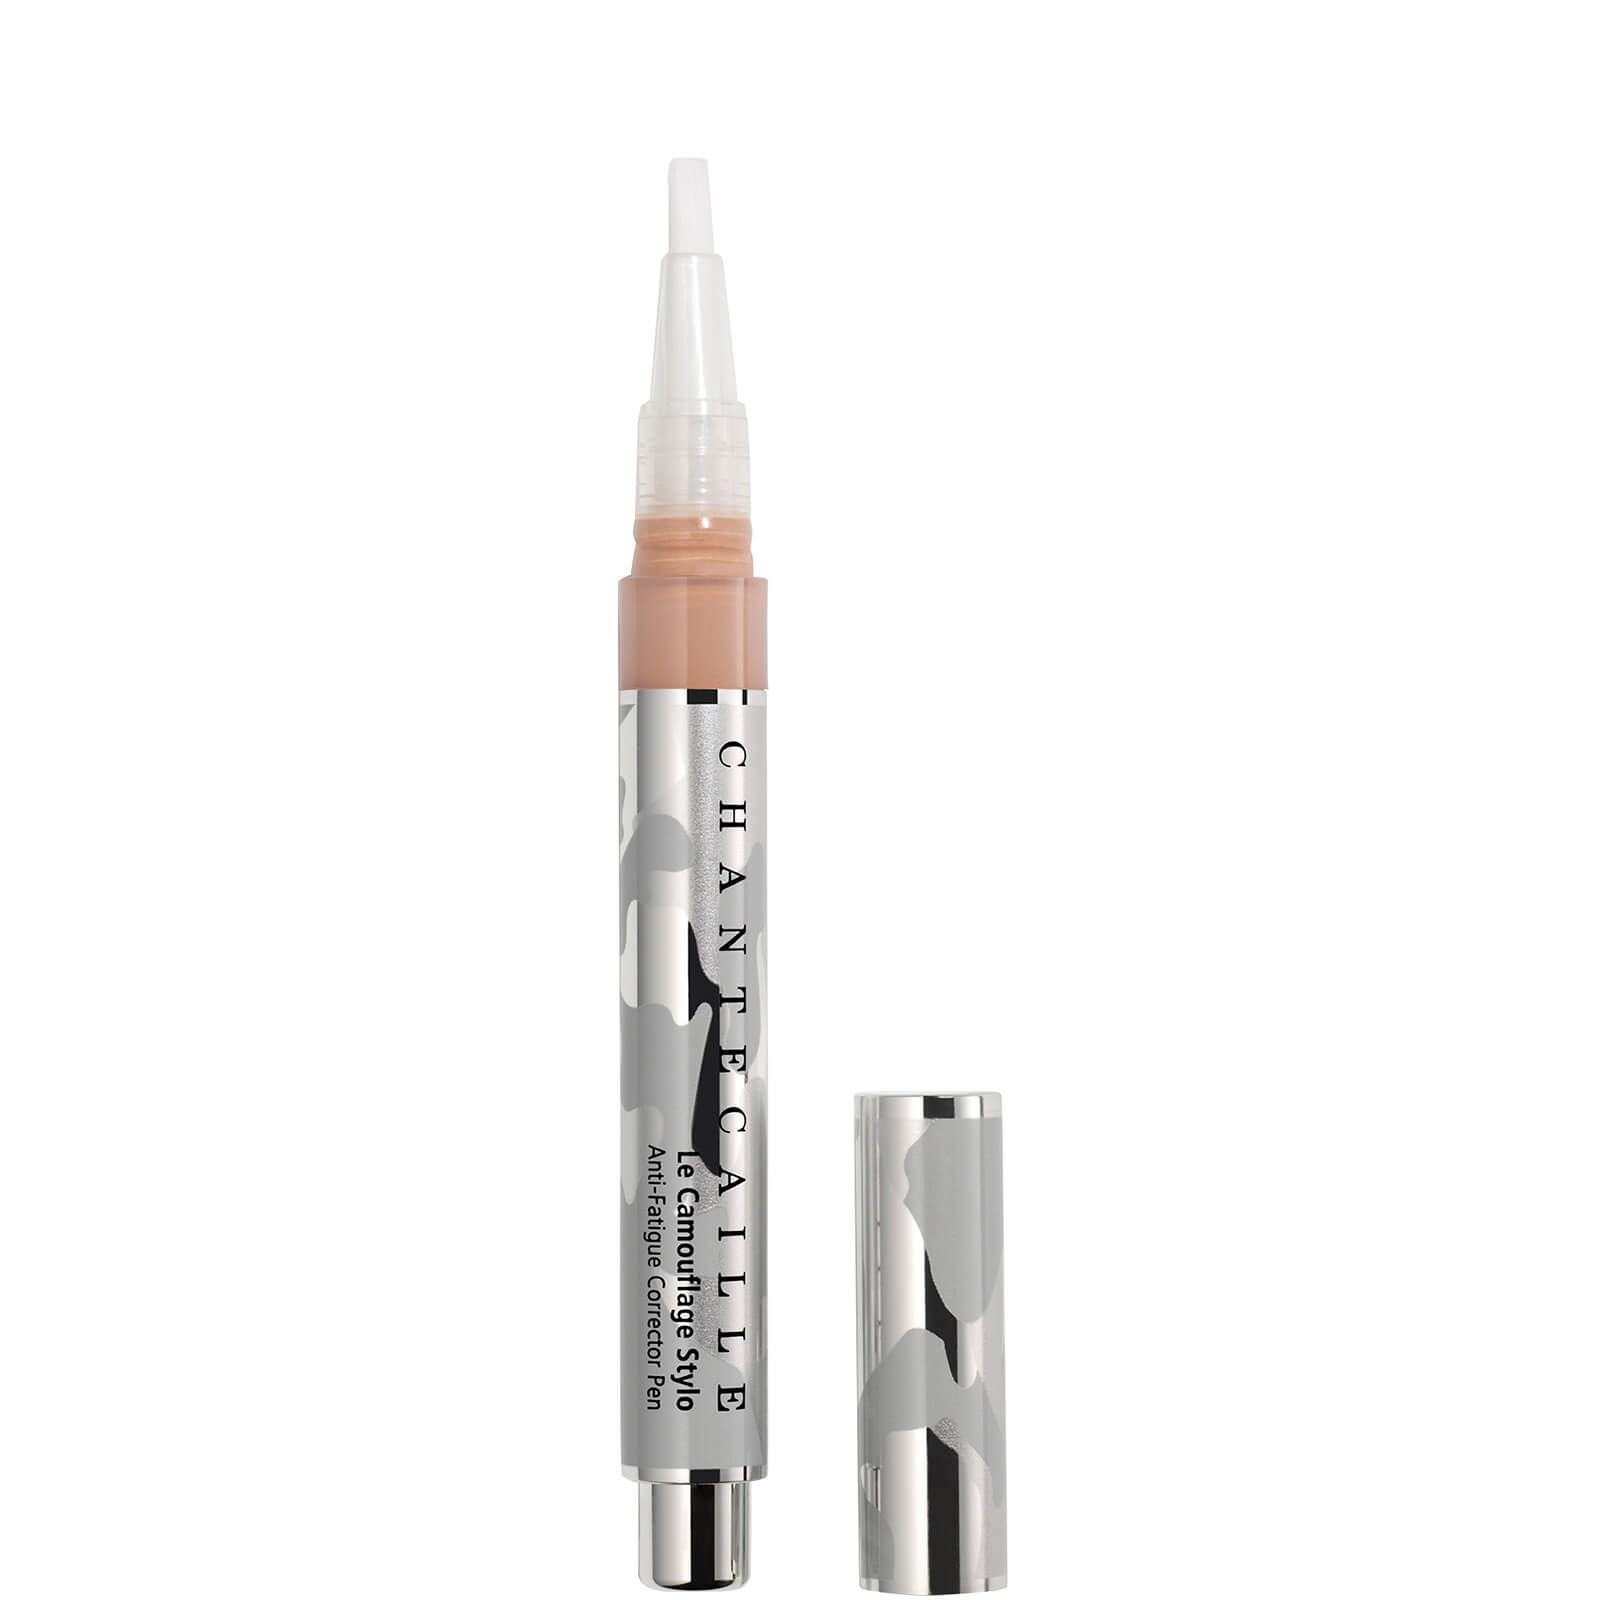 Chantecaille Le Camouflage Stylo Concealer - #5